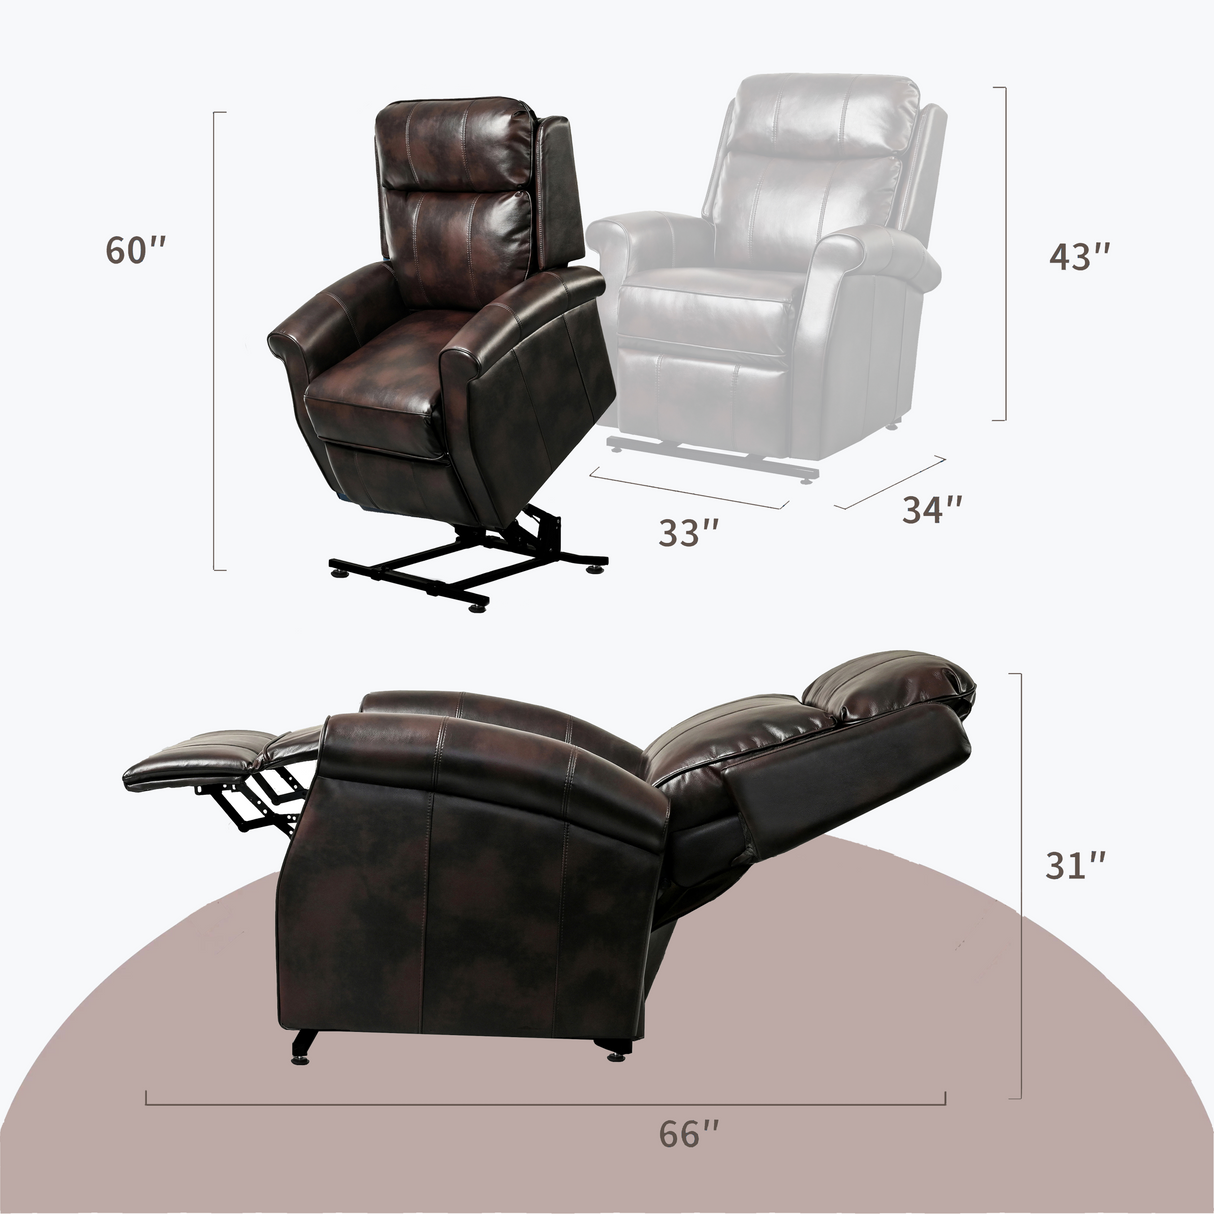 Lehboson Lift Chair Recliners, Electric Power Recliner Chair Sofa for Elderly, massage and heating(brown) Home Elegance USA